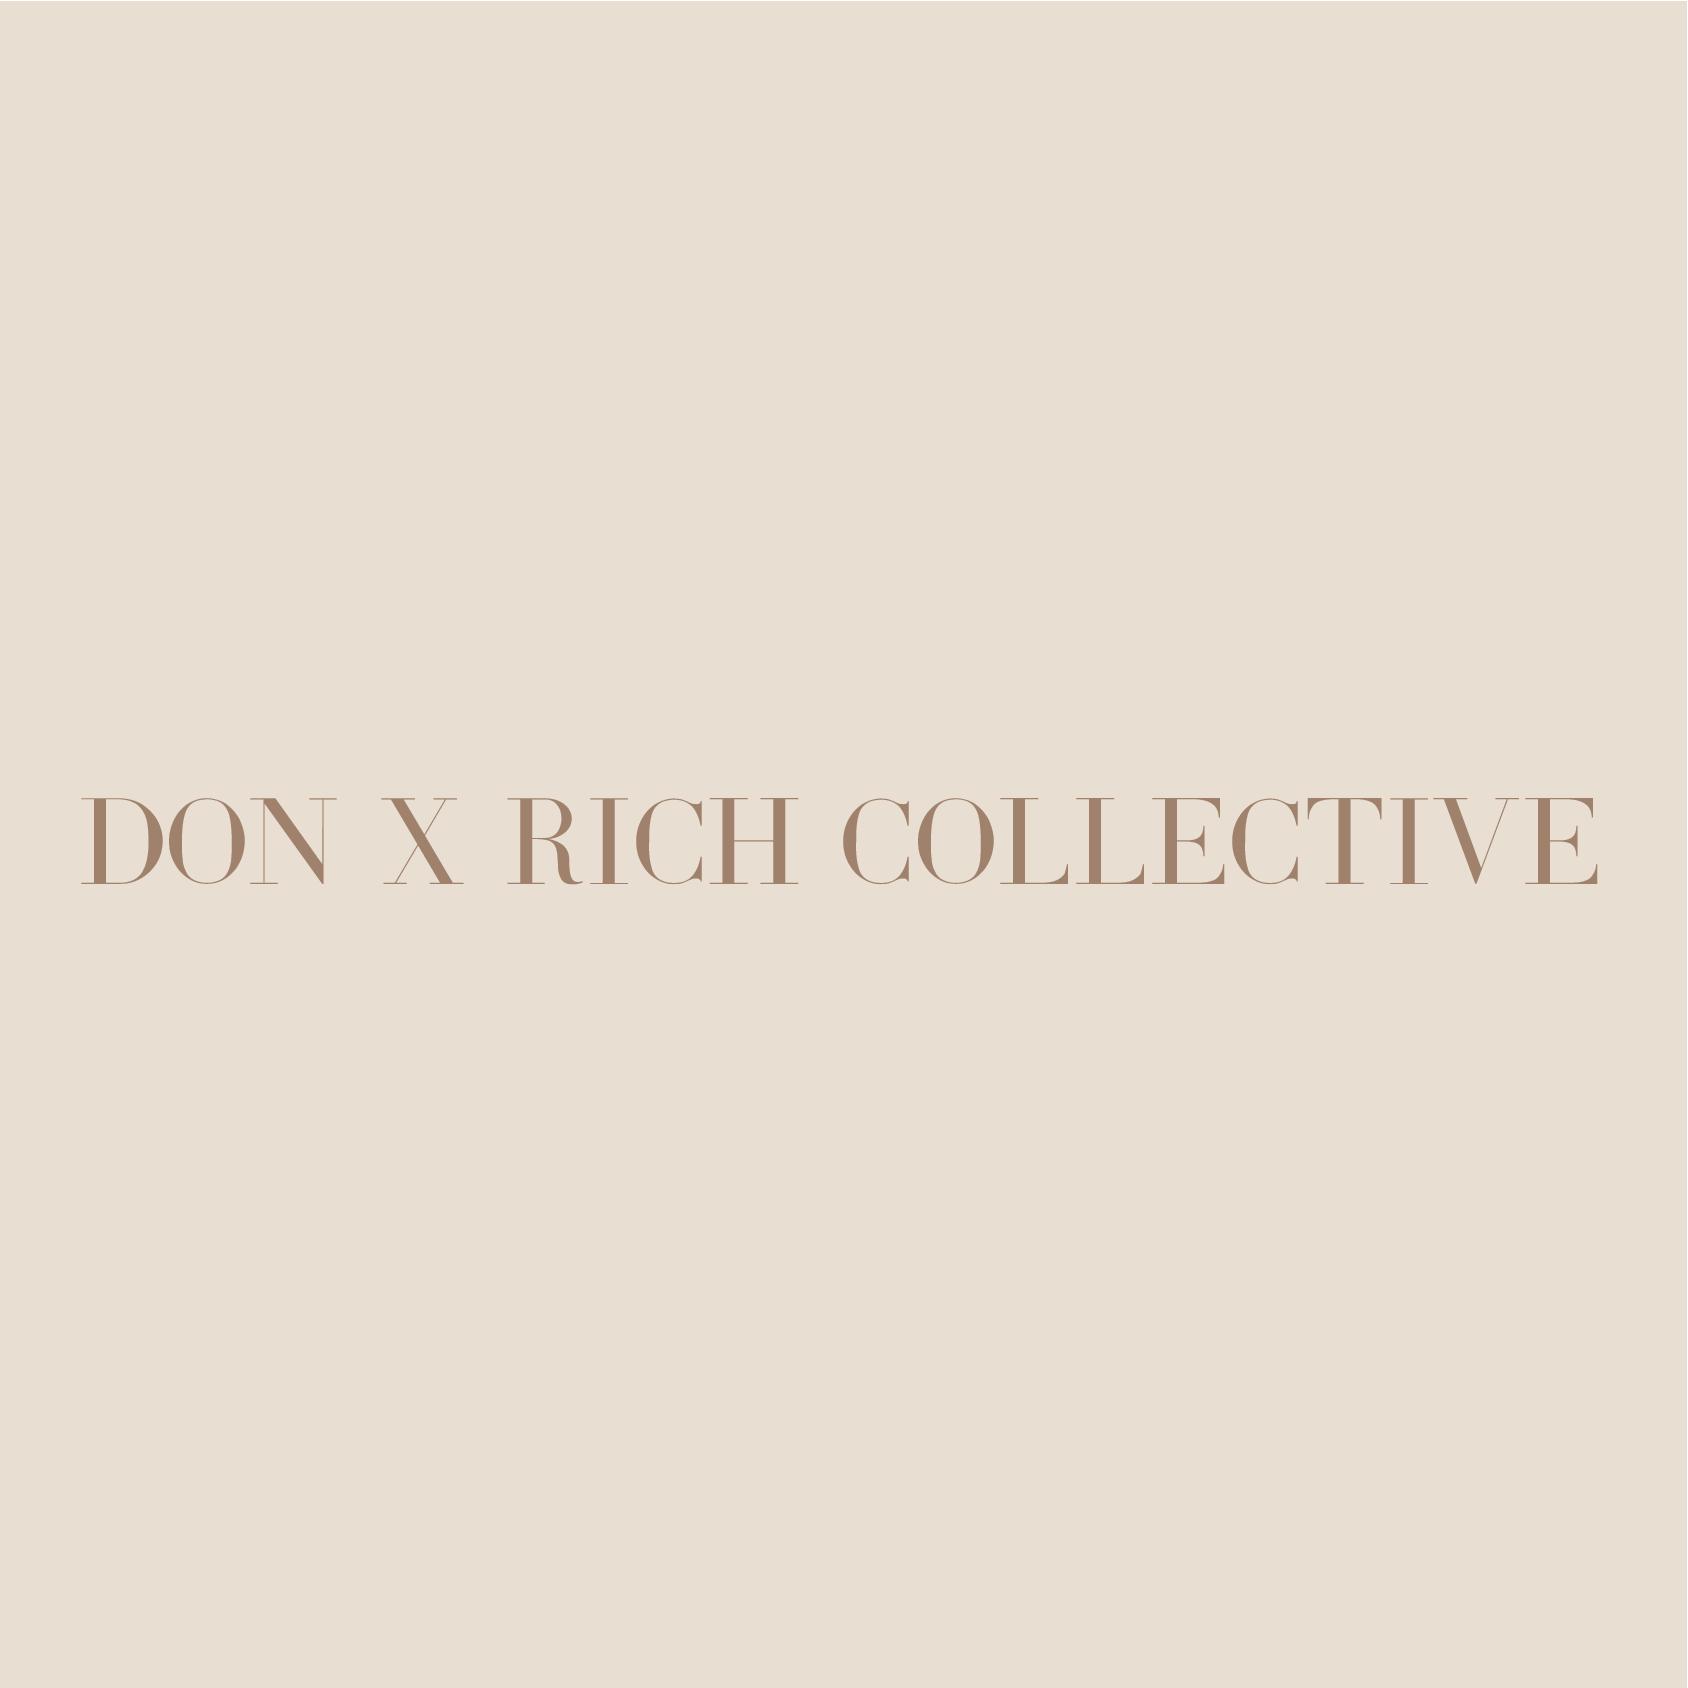 Don X Rich Collective